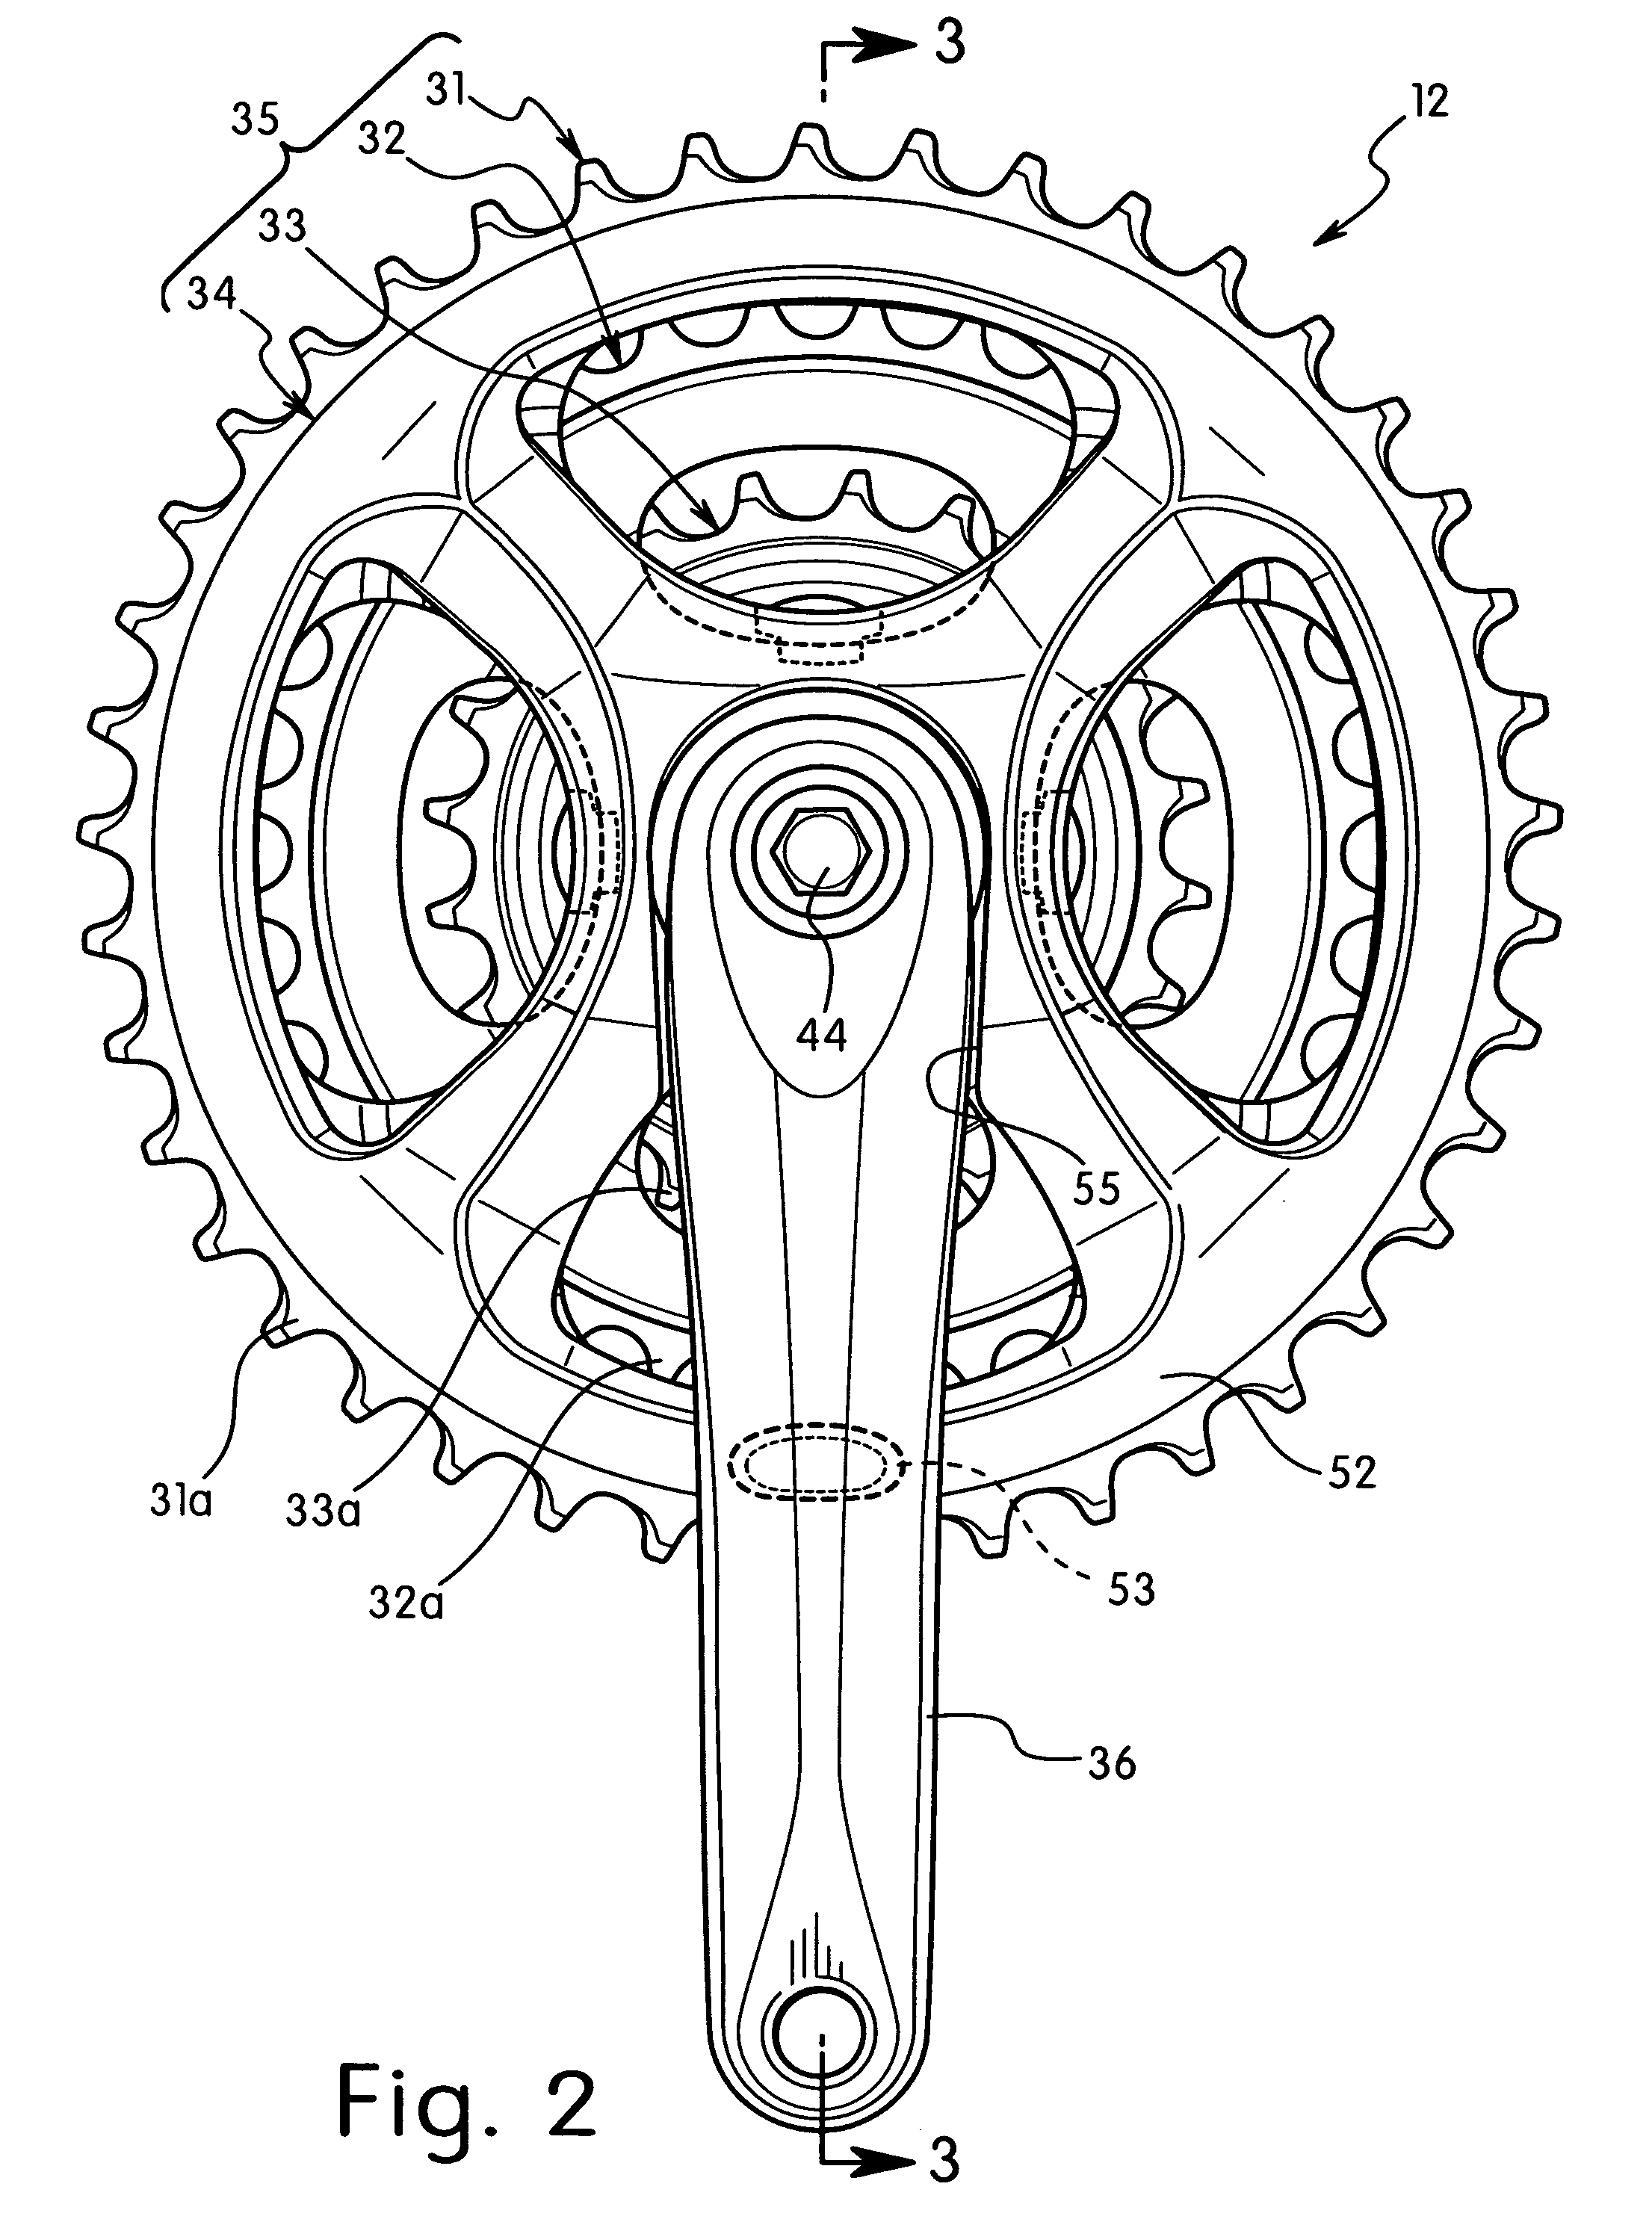 Bicycle chain wheel assembly